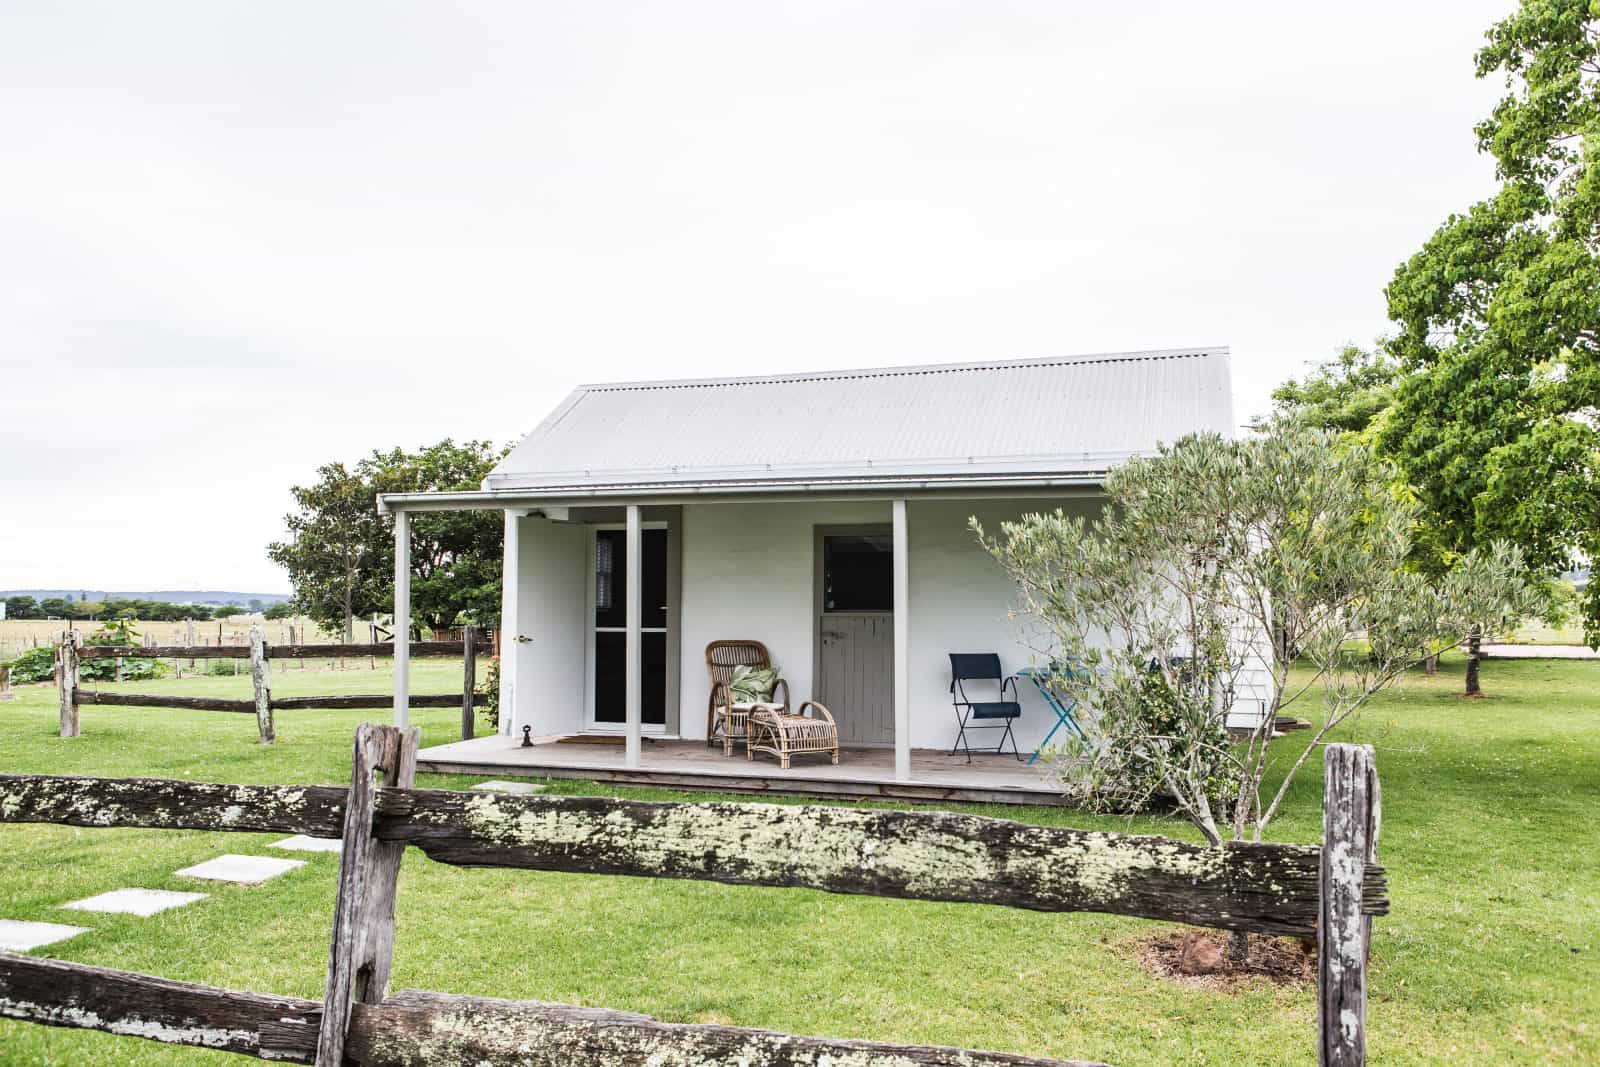 Accommodation-Stables-Old-Schoolhouse-Milton